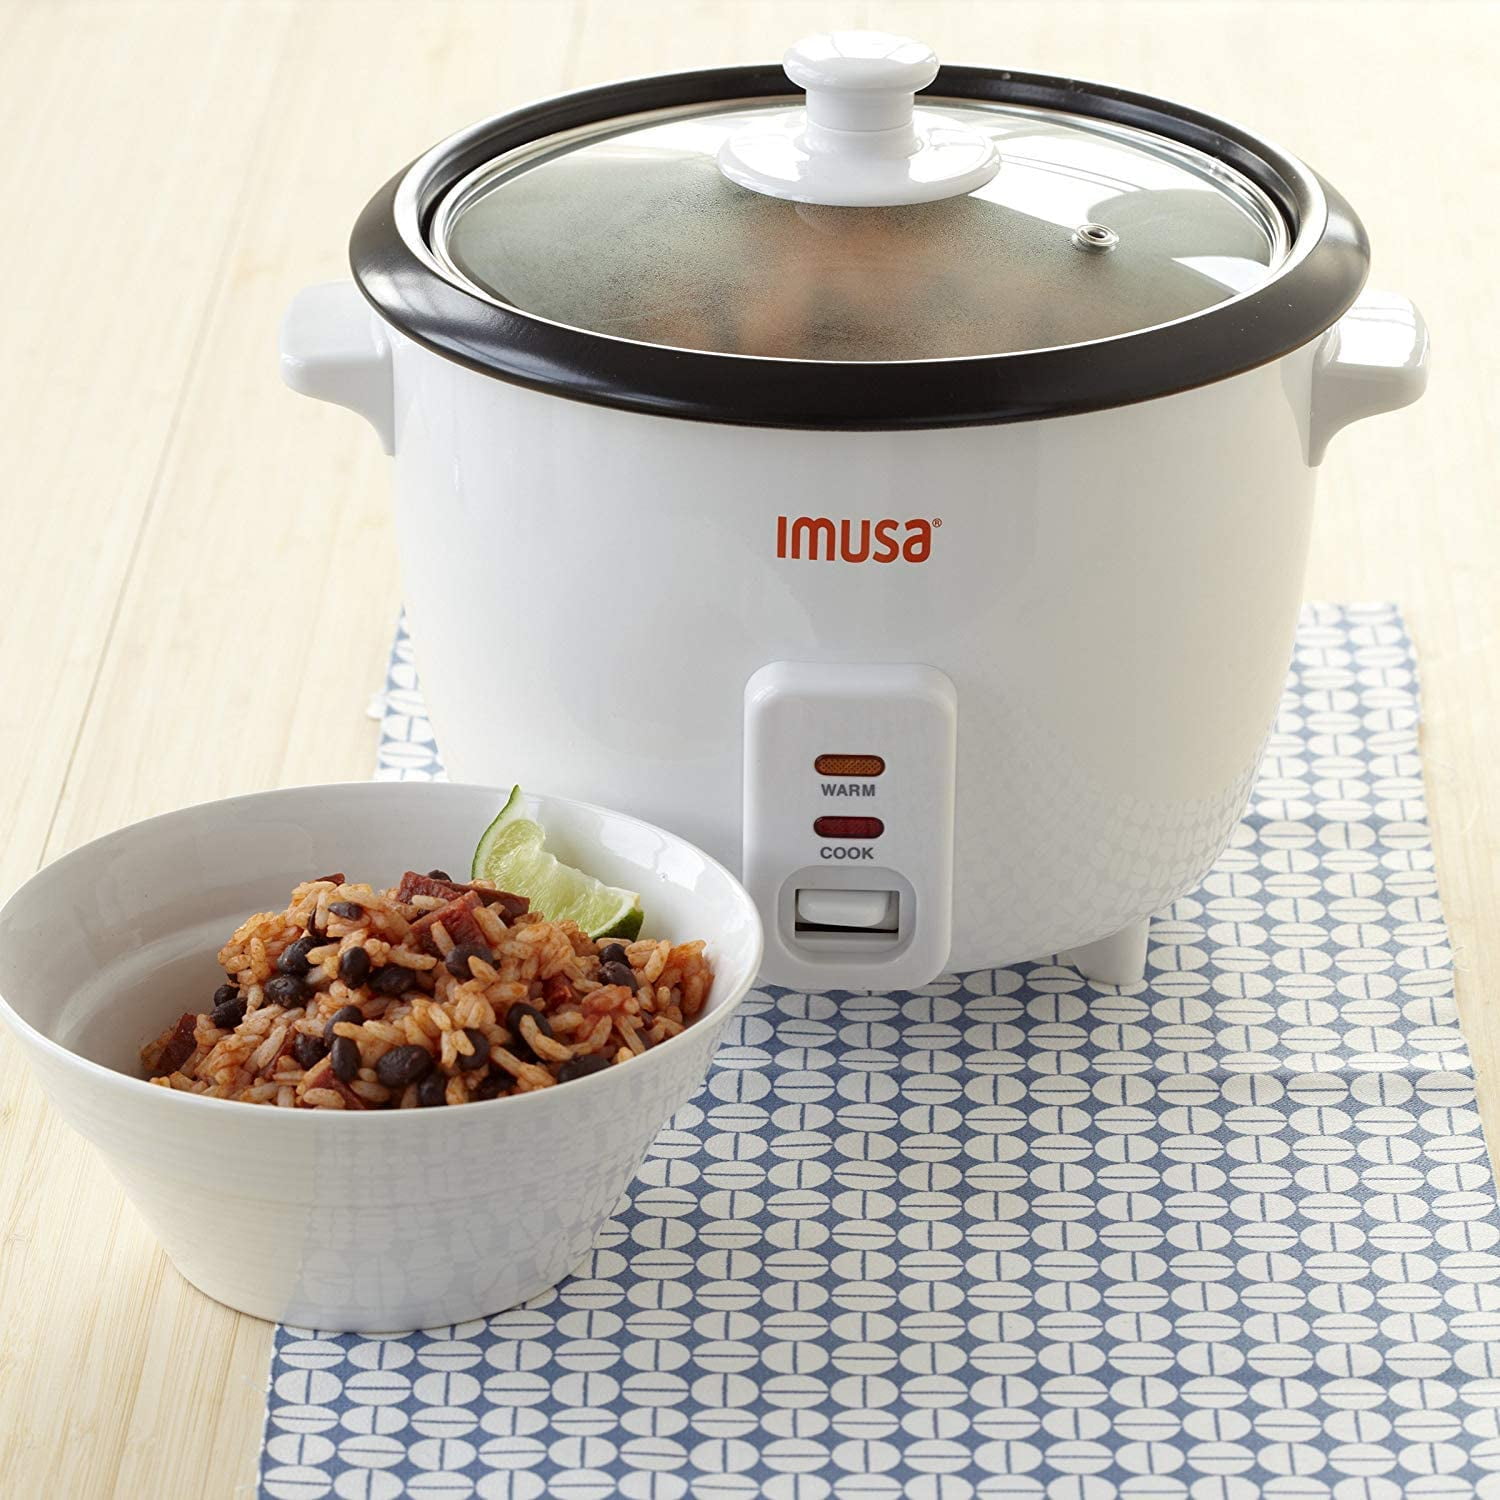 IMUSA rice cooker - appliances - by owner - sale - craigslist